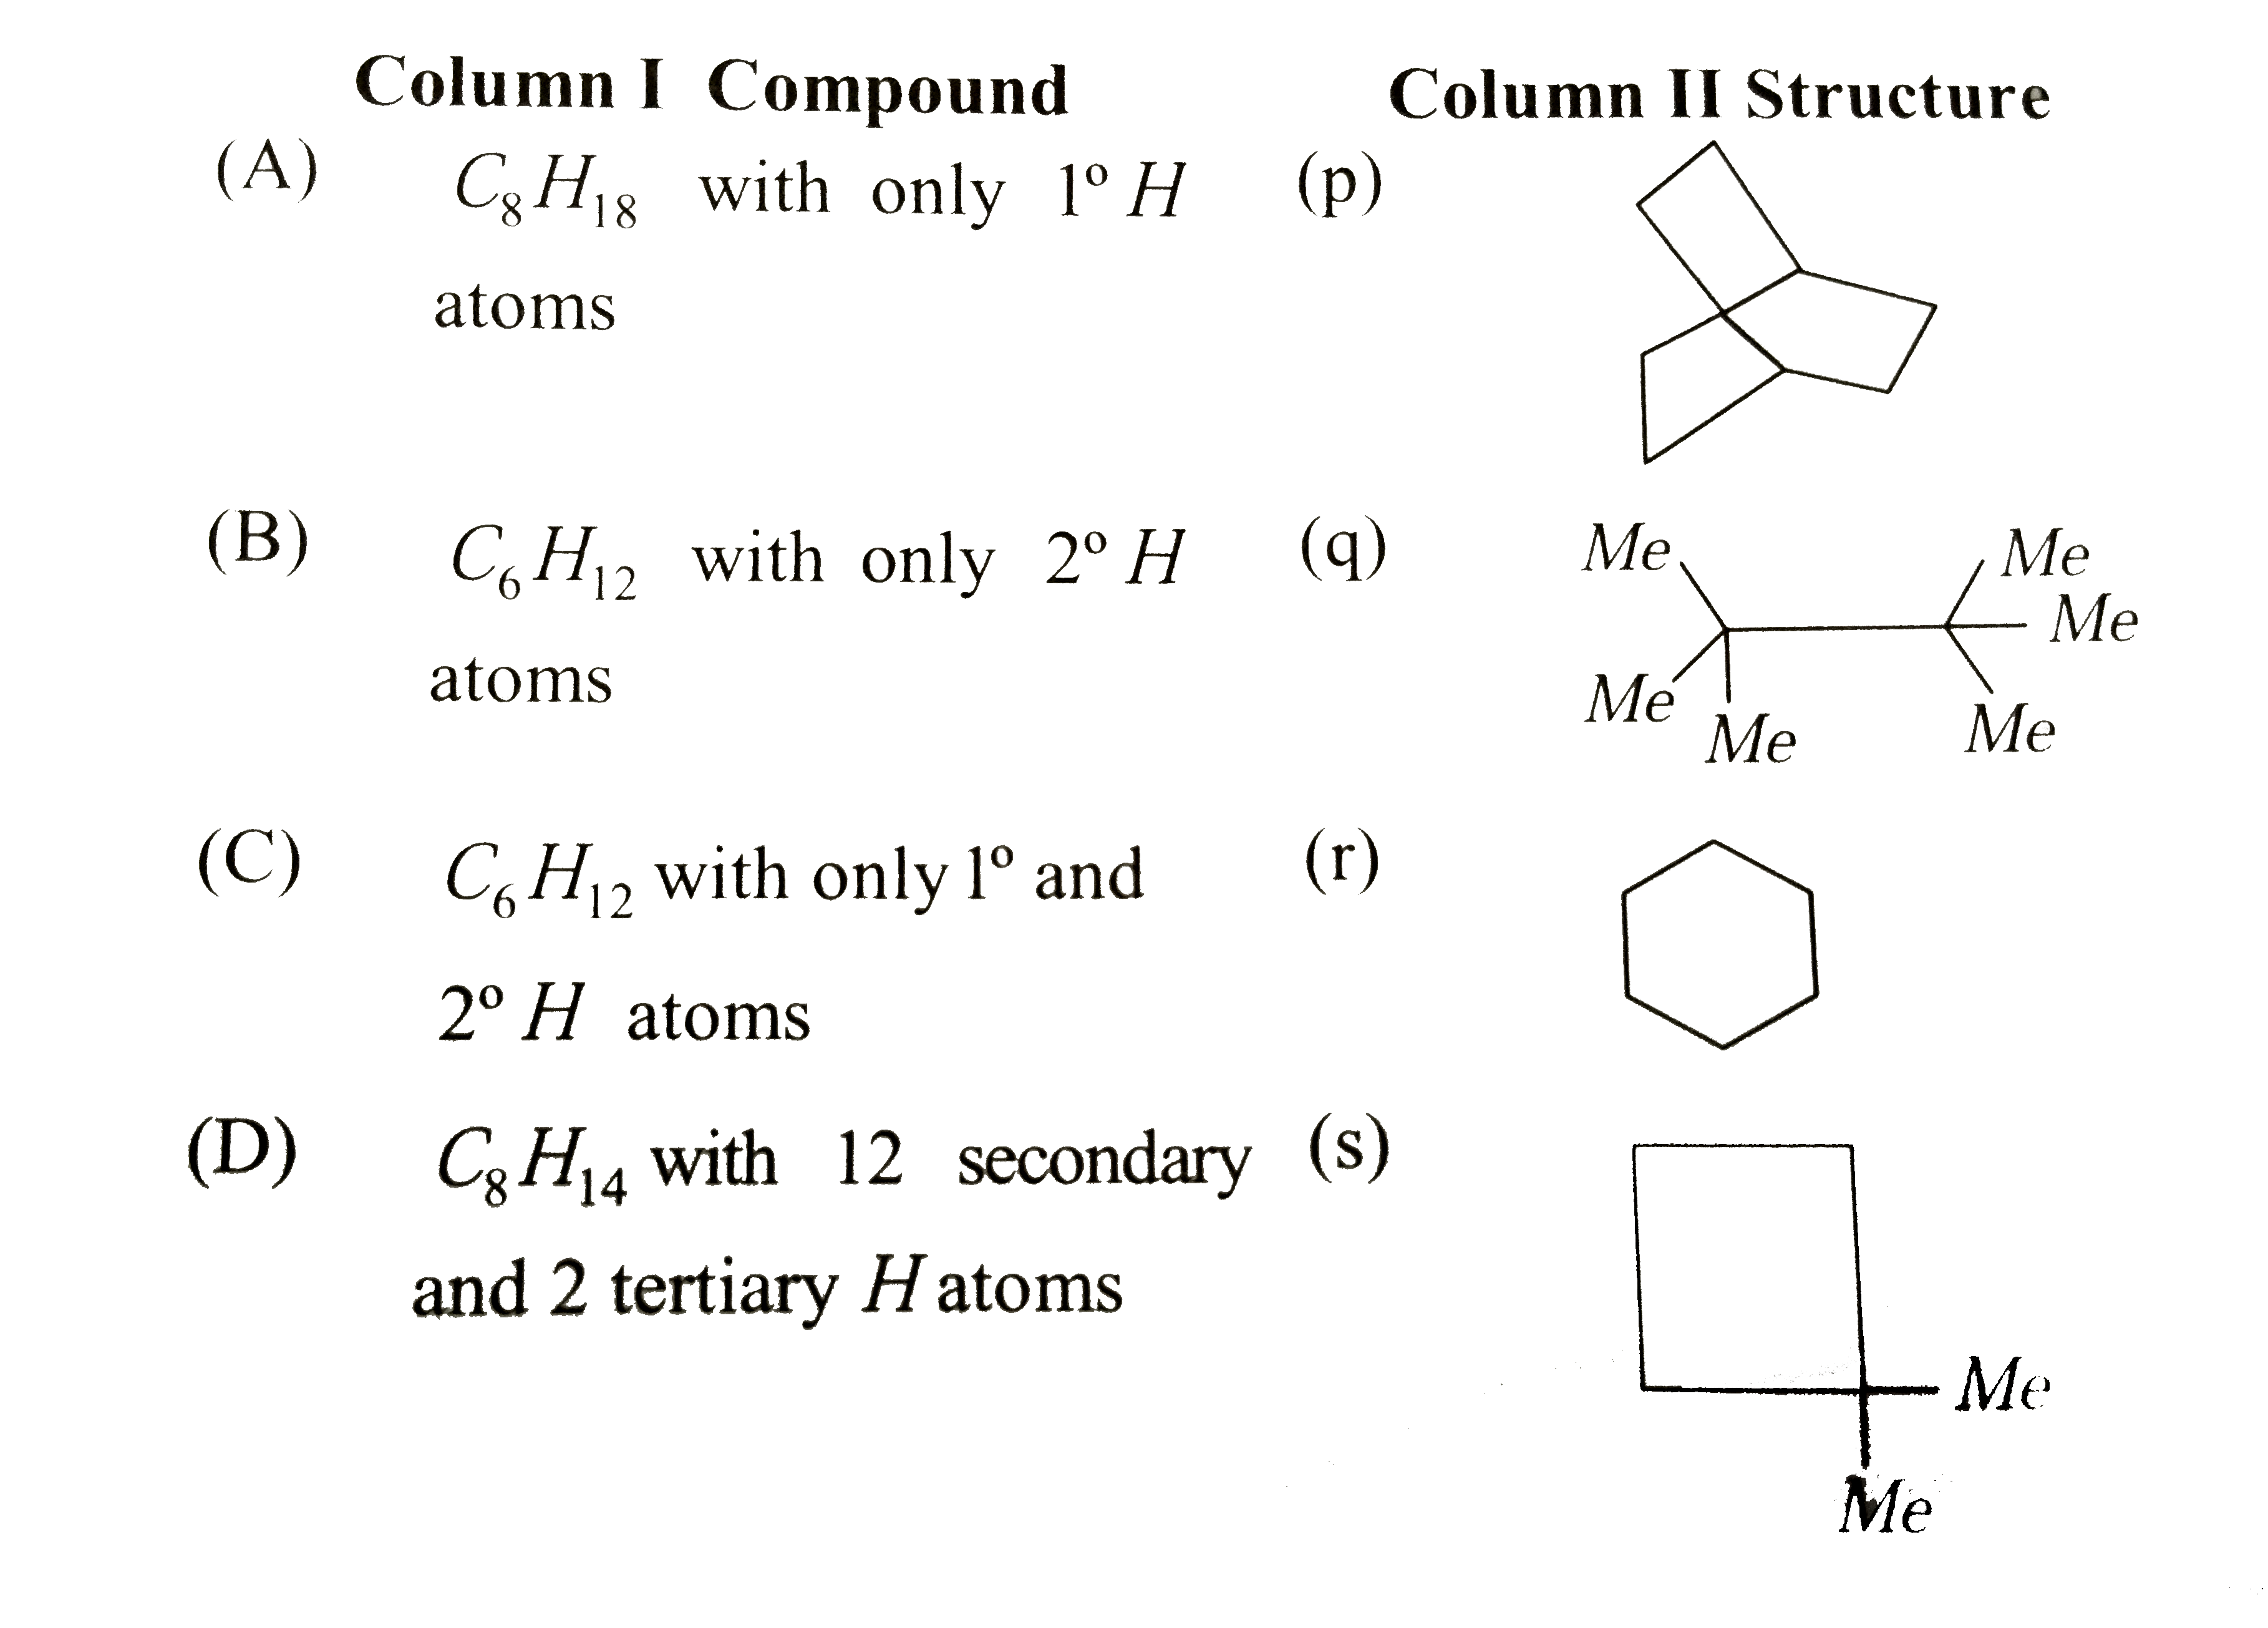 Match the compounds in Column I with their structure/characteristic /reaction /stereochemistry etc . Given in coloumn II.